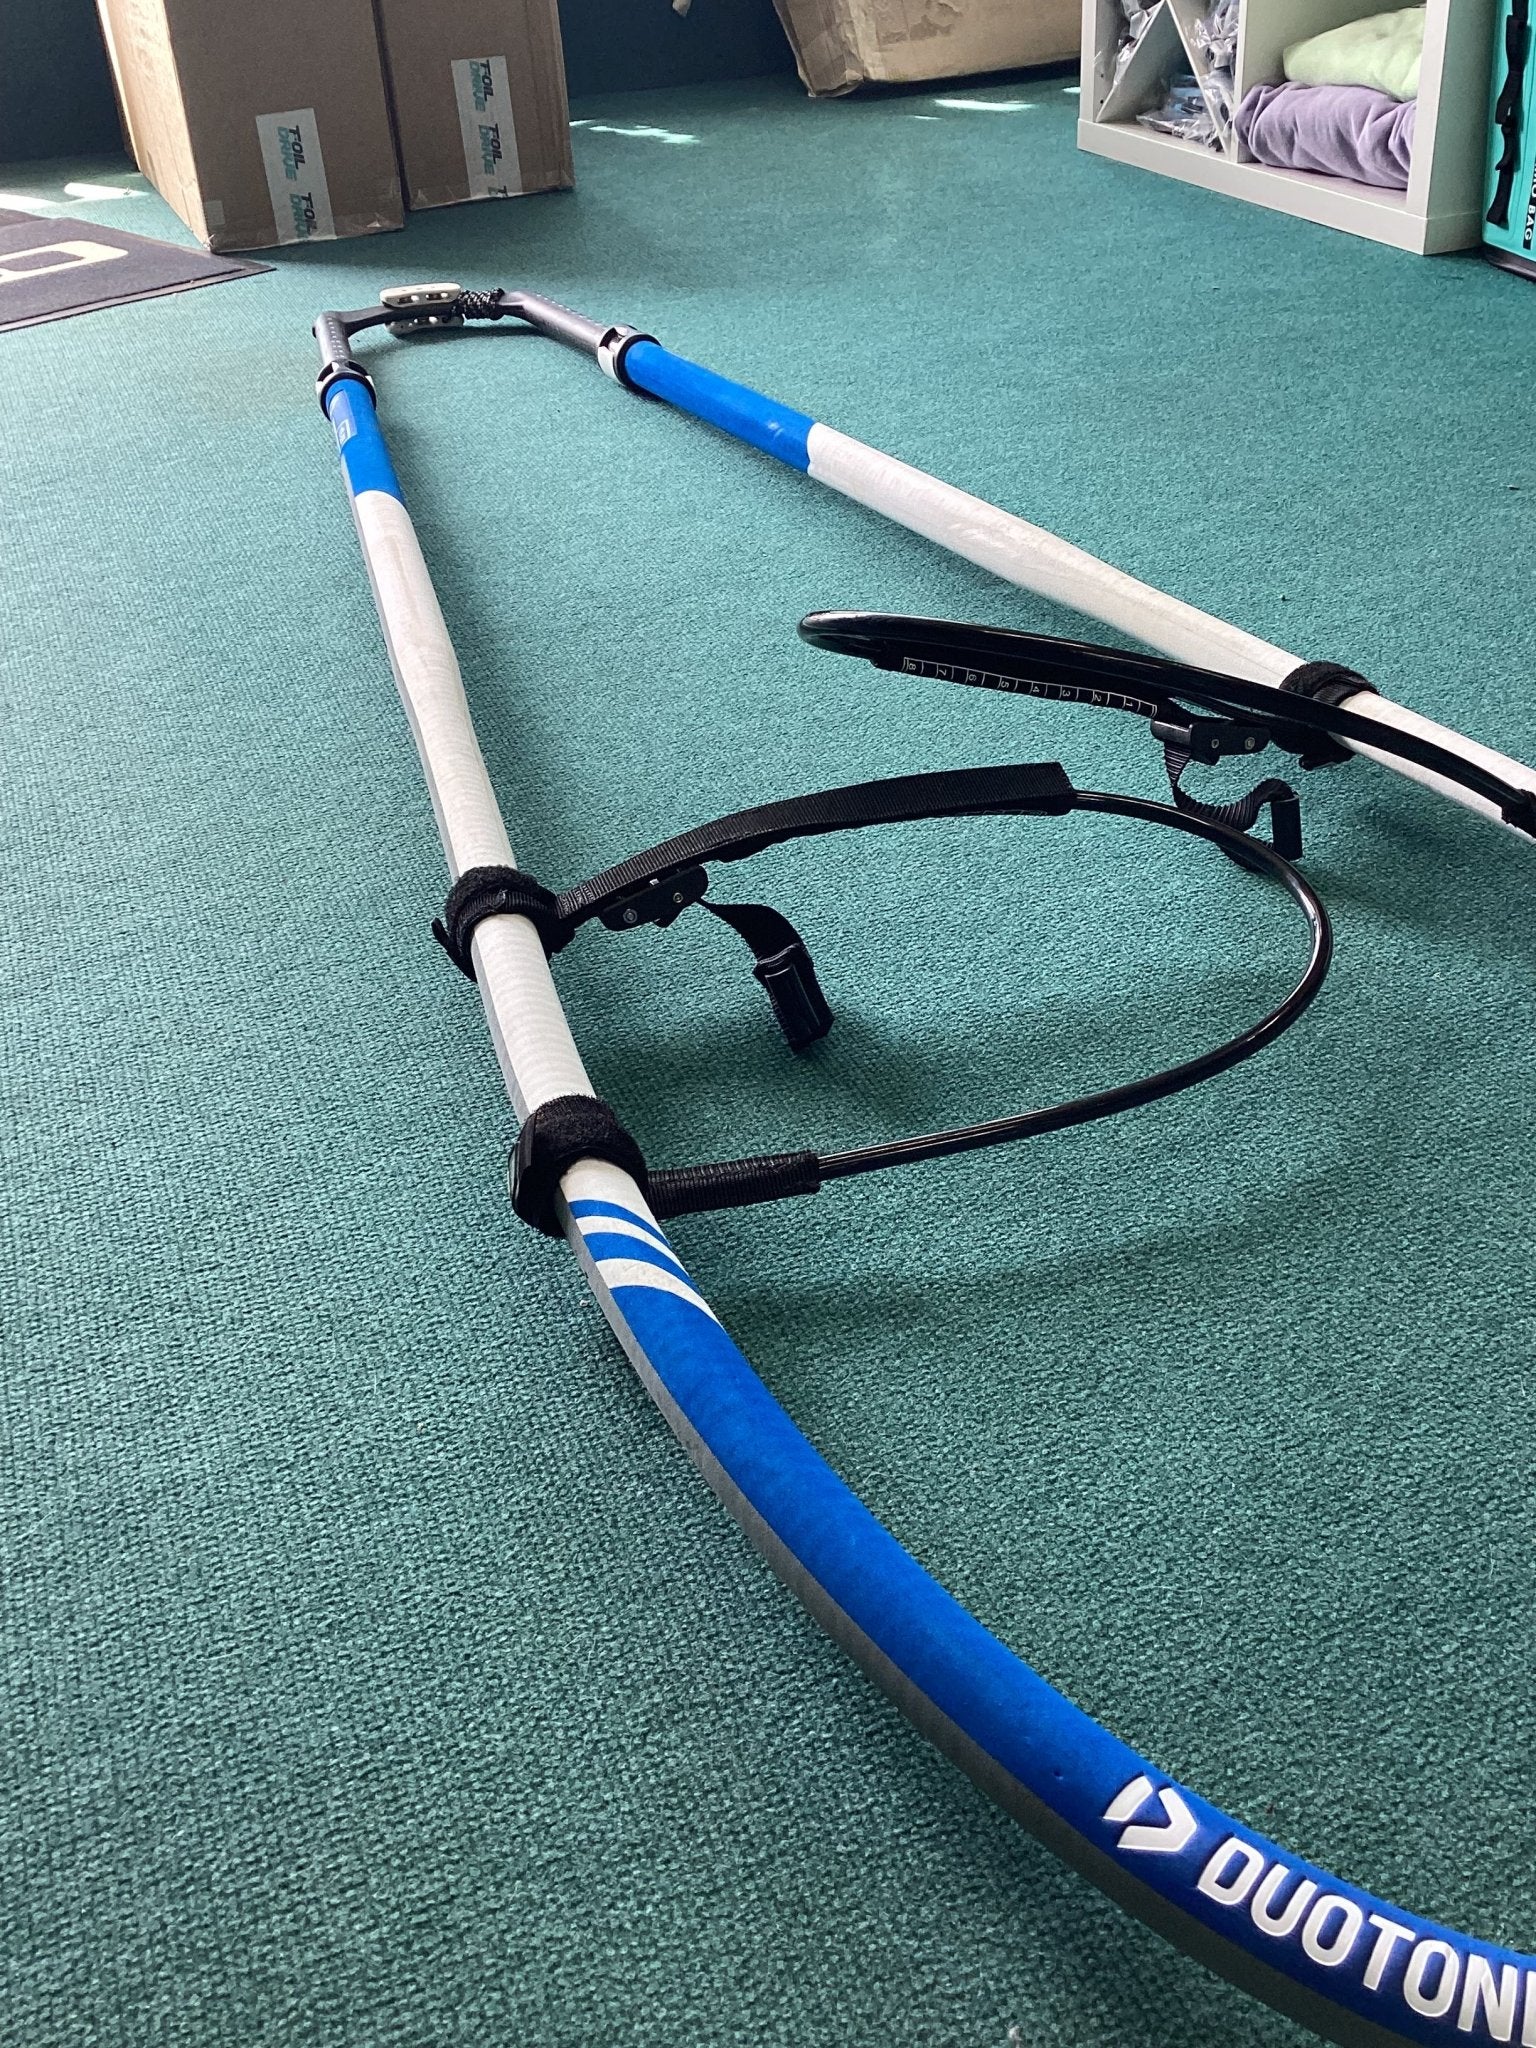 Used Duotone 100% Carbon EPX series windsurfing boom 175-225 - Worthing Watersports - Windsurfing Boom - Duotone Windsurfing